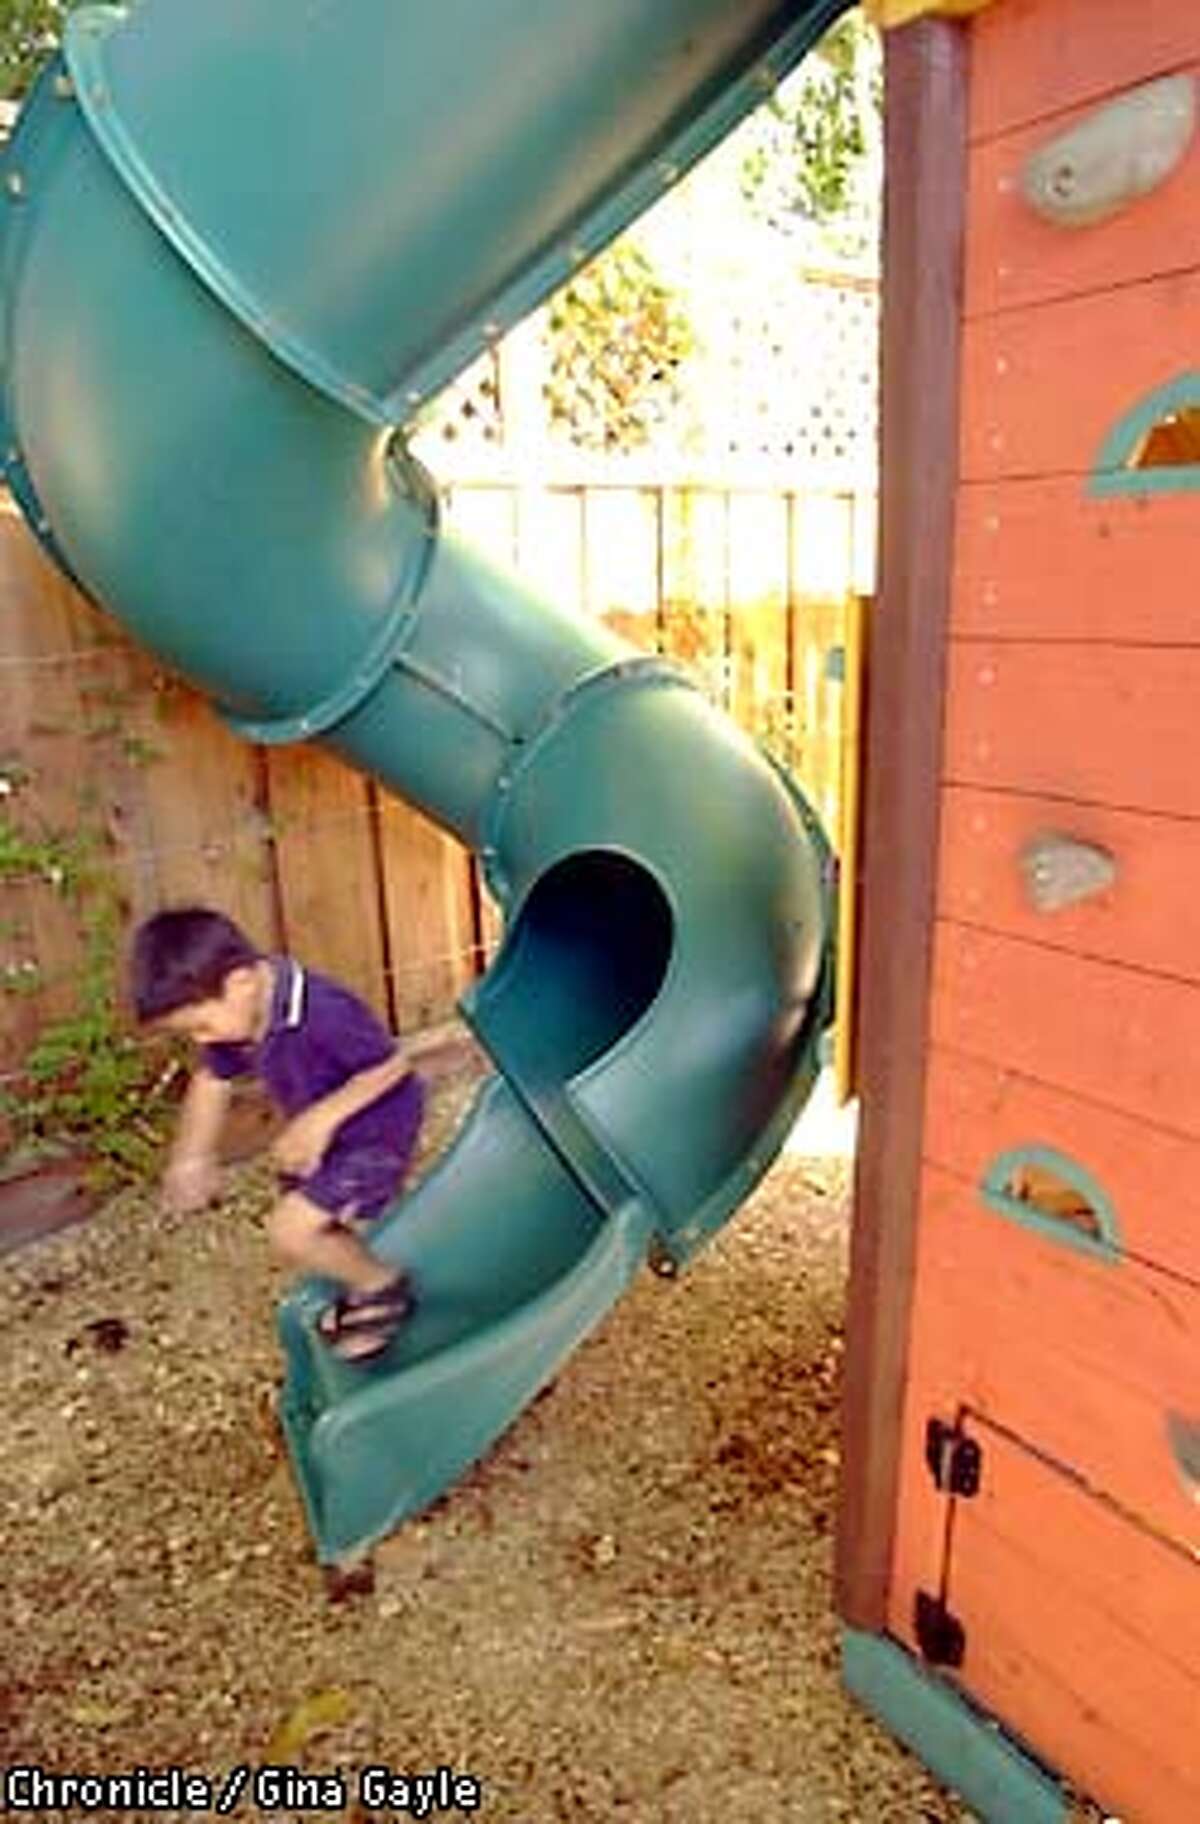 Tanner Bost,5, jumps off the slide of the treehouse in his backyard. Photo by Gina Gayle/The SF Chronicle.